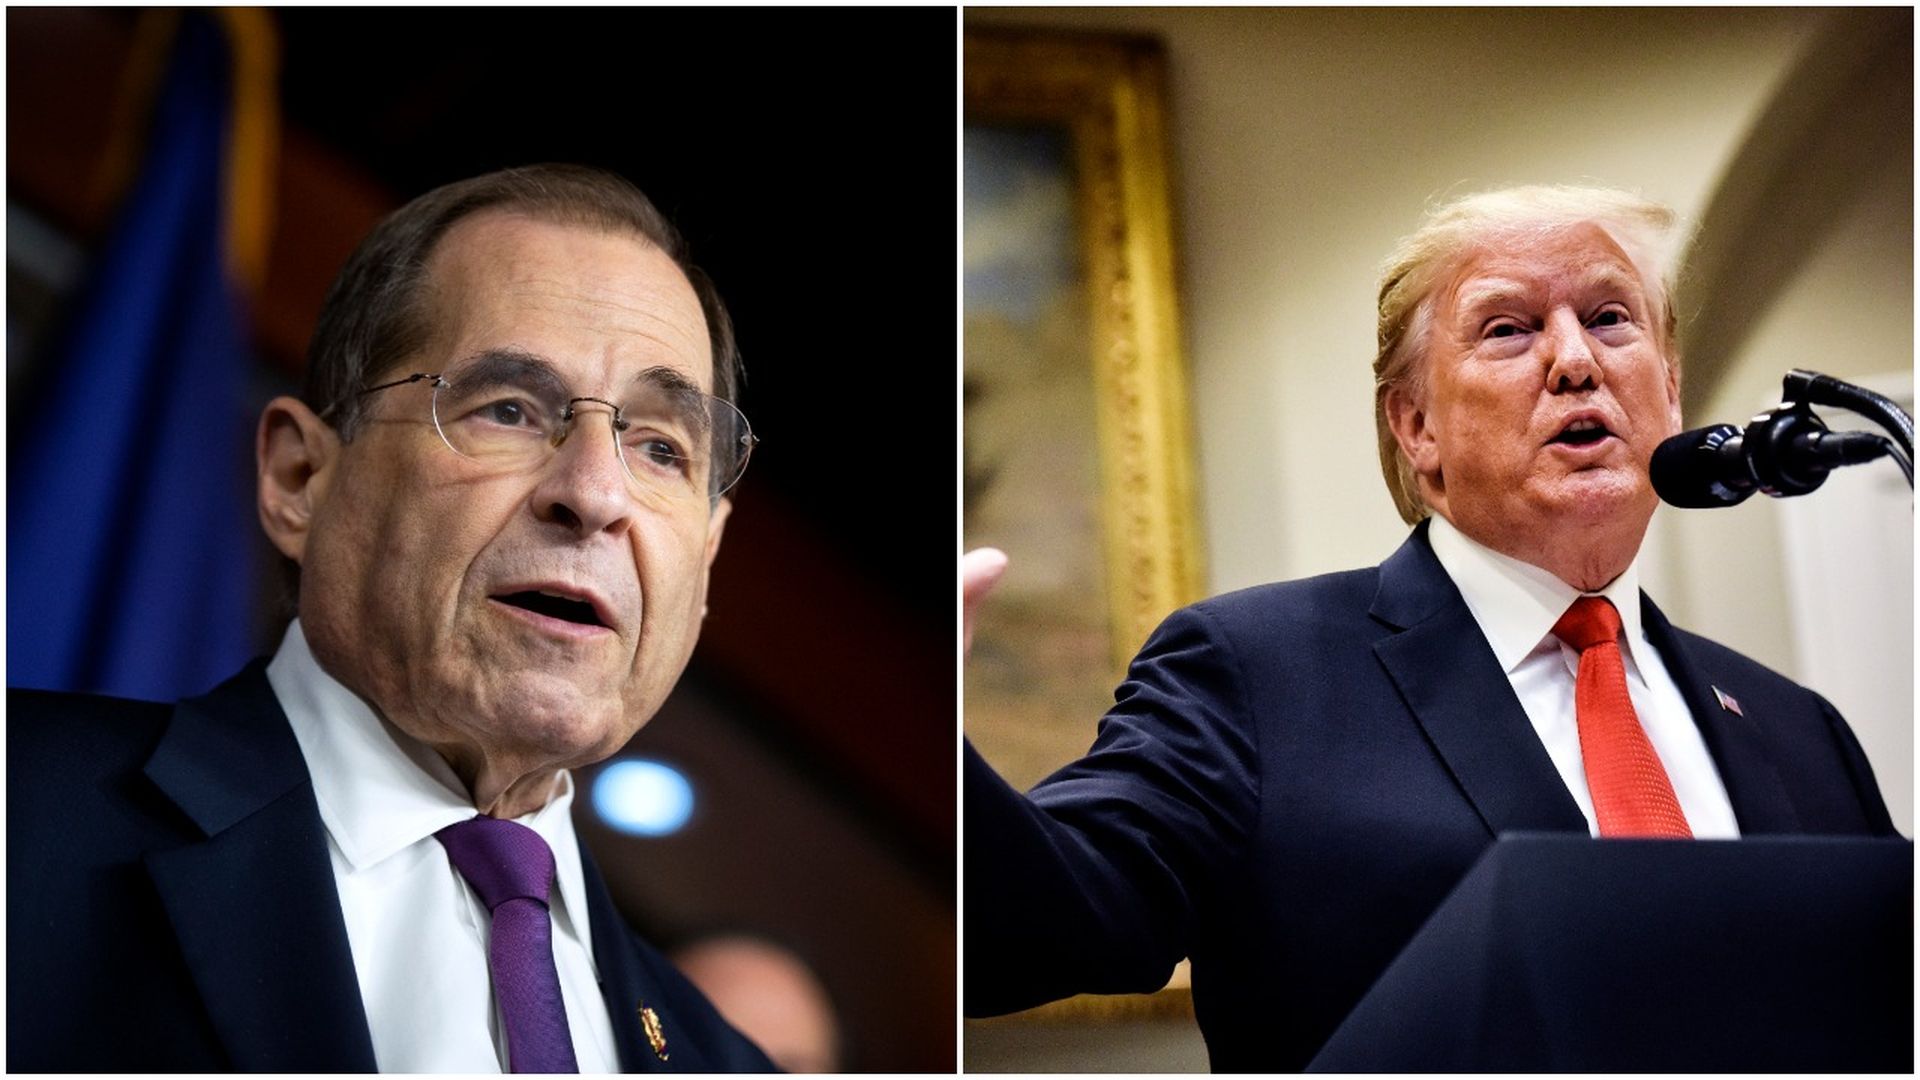 This image is a two-way splitscreen between Nadler and Trump.